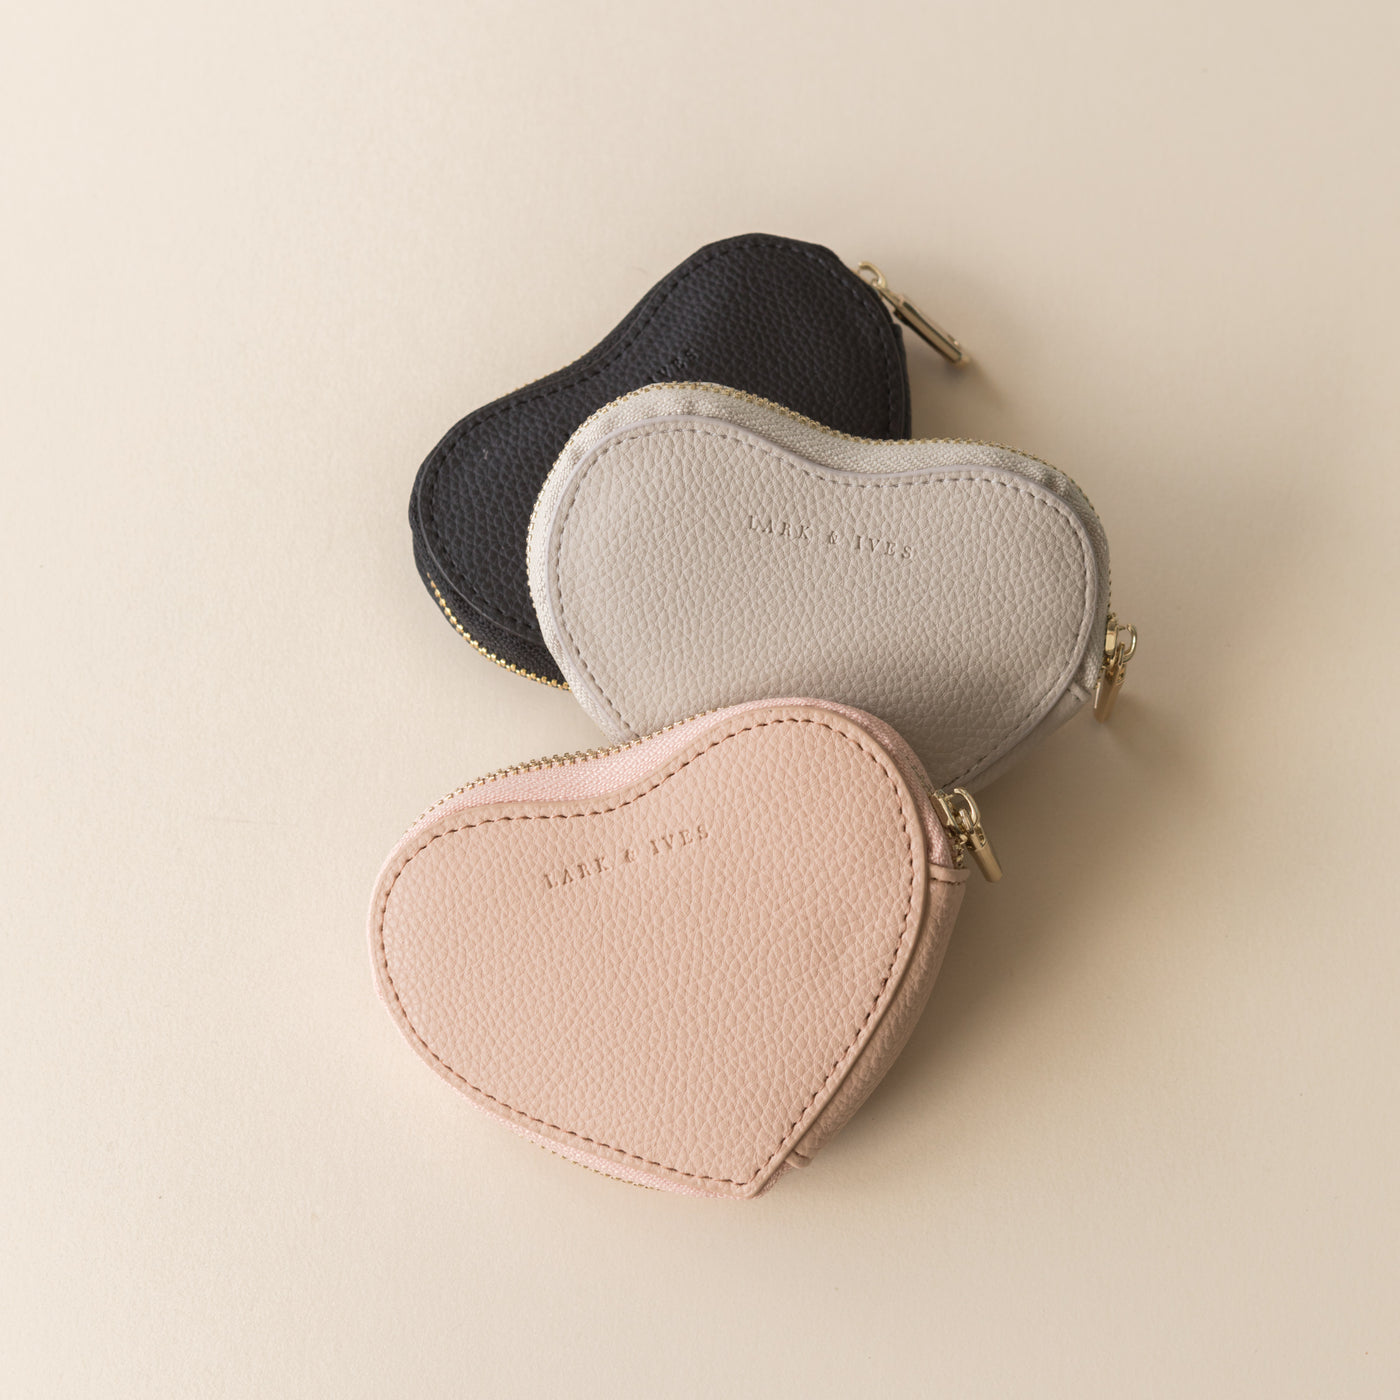 Lark and Ives / Vegan Leather Accessories / Small Accessories / Coin Purse / Heart shaped / Coin Pouch / Mini Wallet / Black, Light Grey and Nude Pink